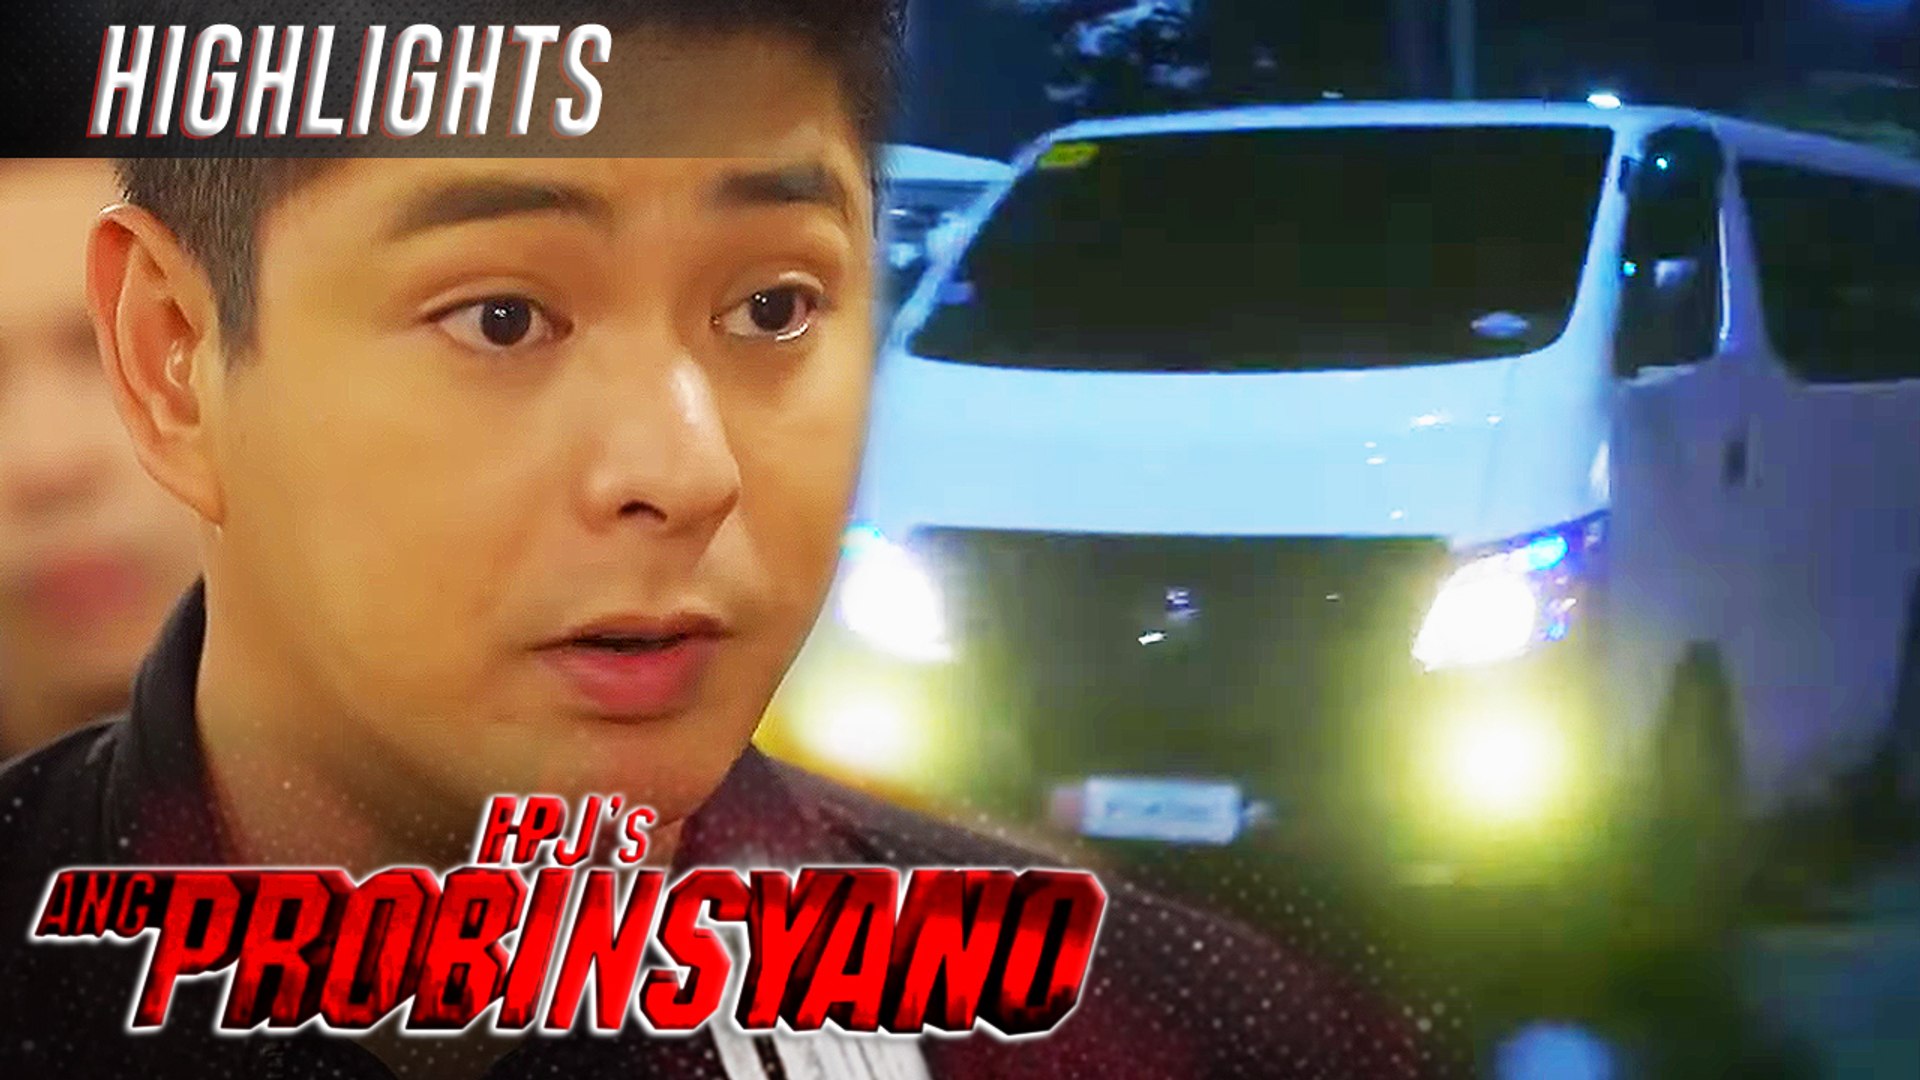 Cardo is alarmed by the white van scare | FPJ's Ang Probinsyano